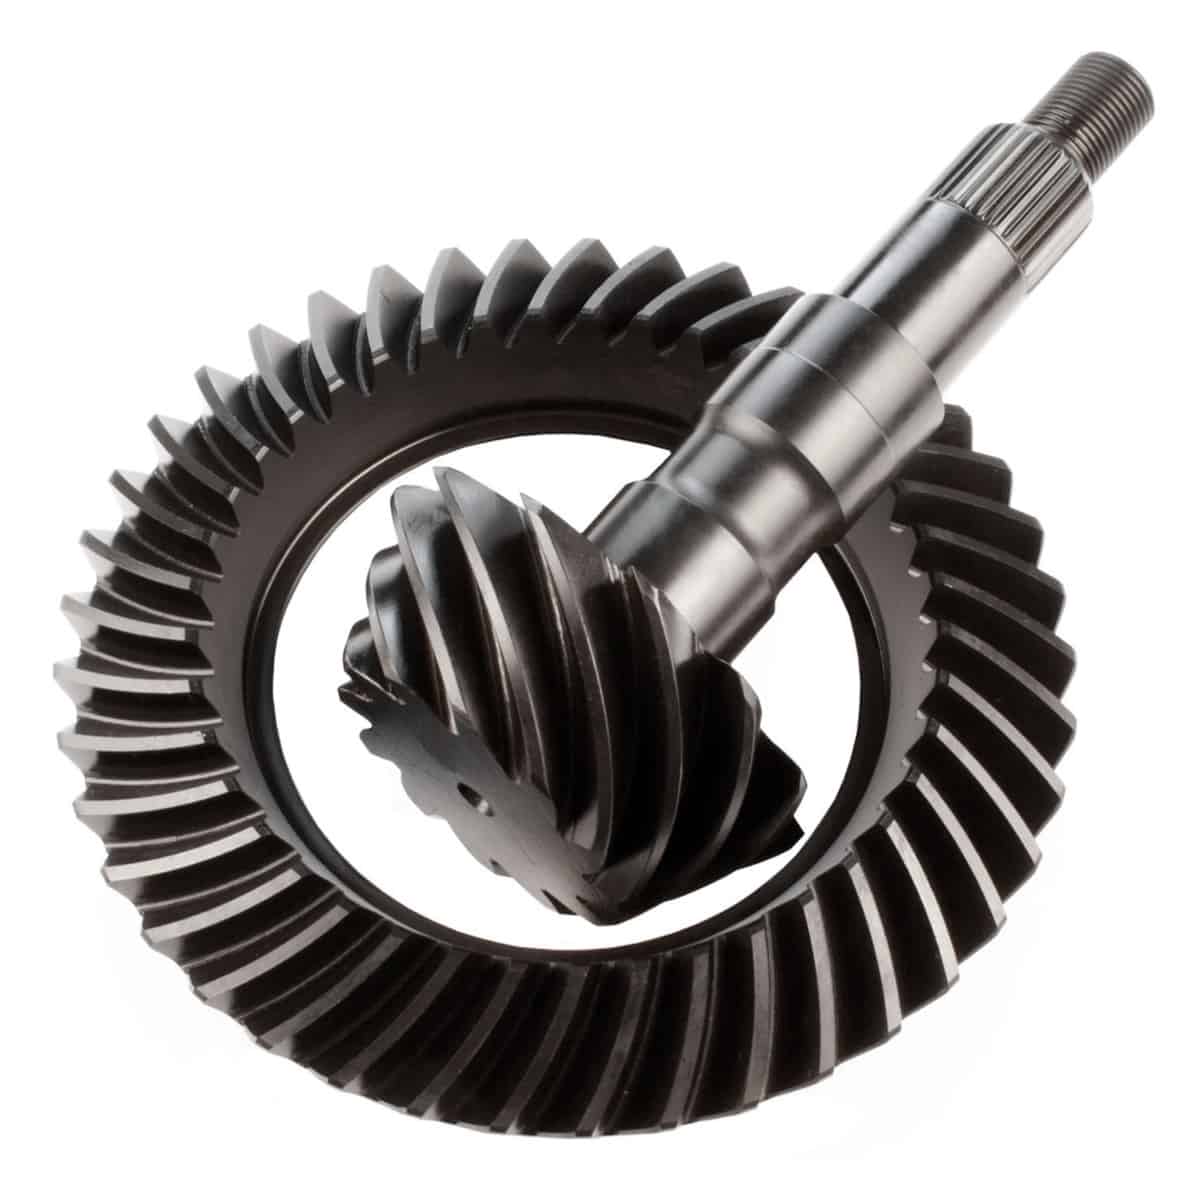 GM 7.5" 7.6" REAREND ELITE GEAR SET-CHEVY CAMARO G-BODY 3.73 RING AND PINION 